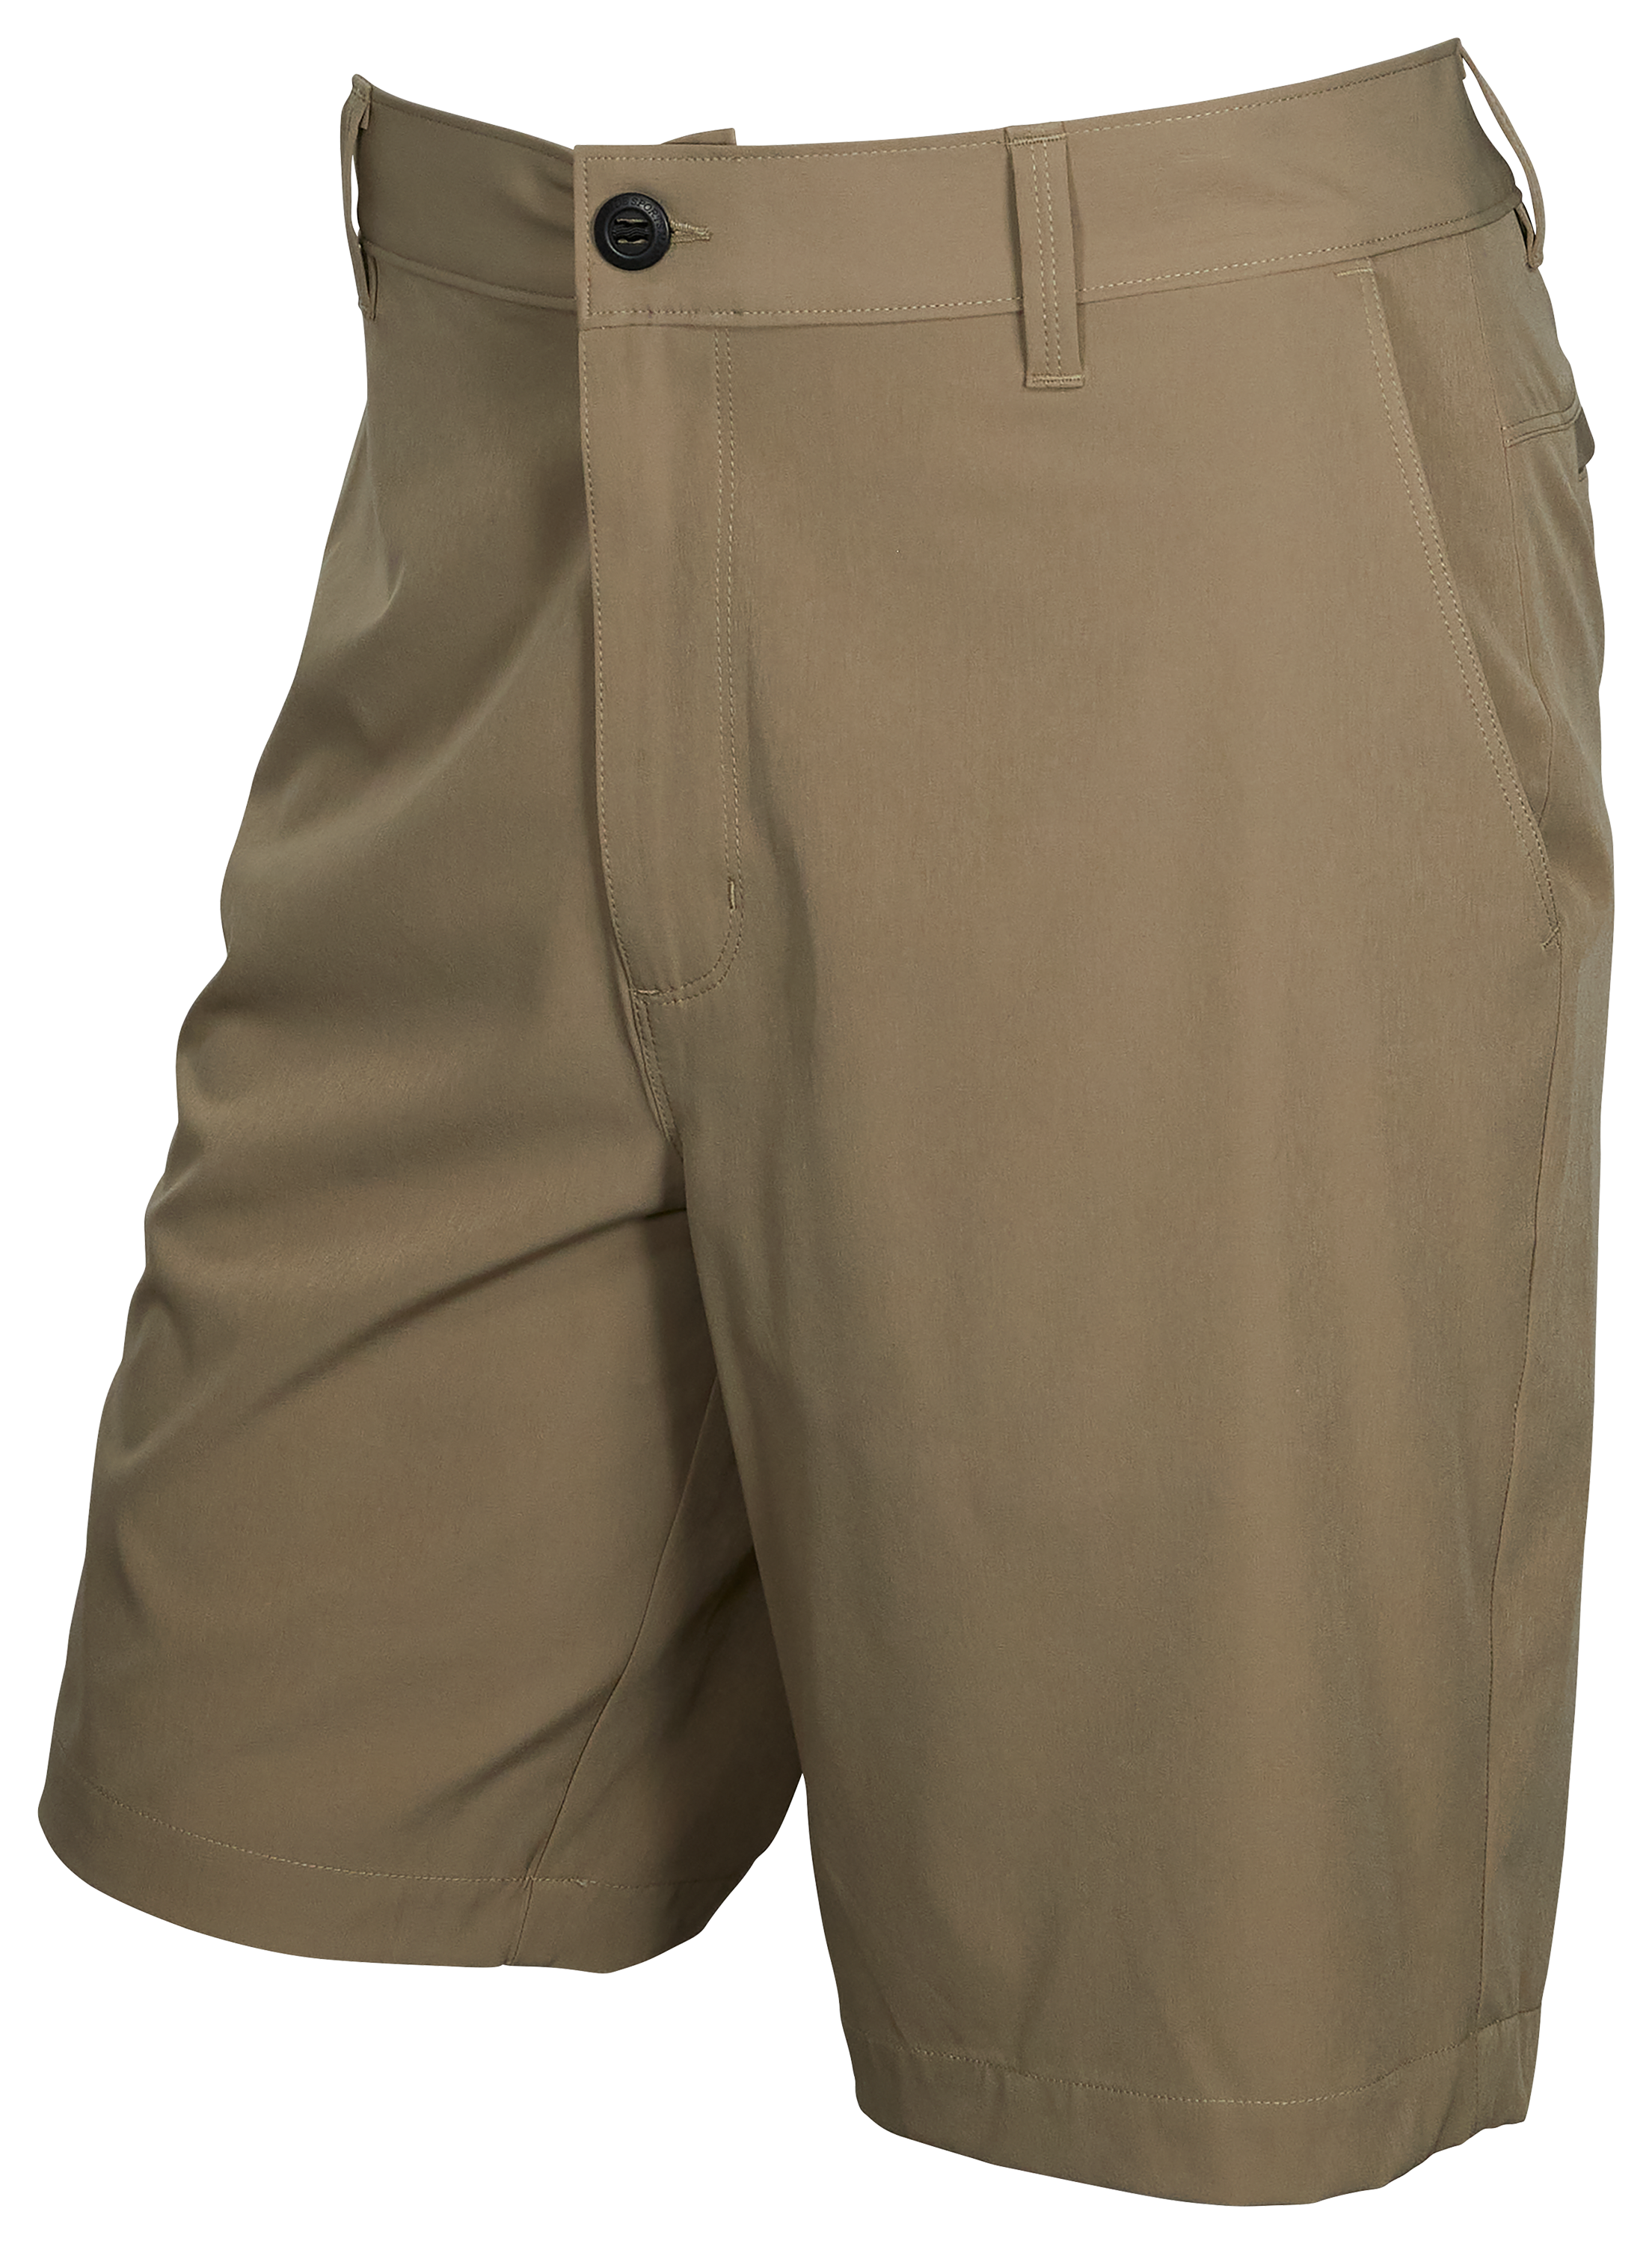 World Wide Sportsman Pescador Stretch Fishing Shorts for Men - Timber - 34